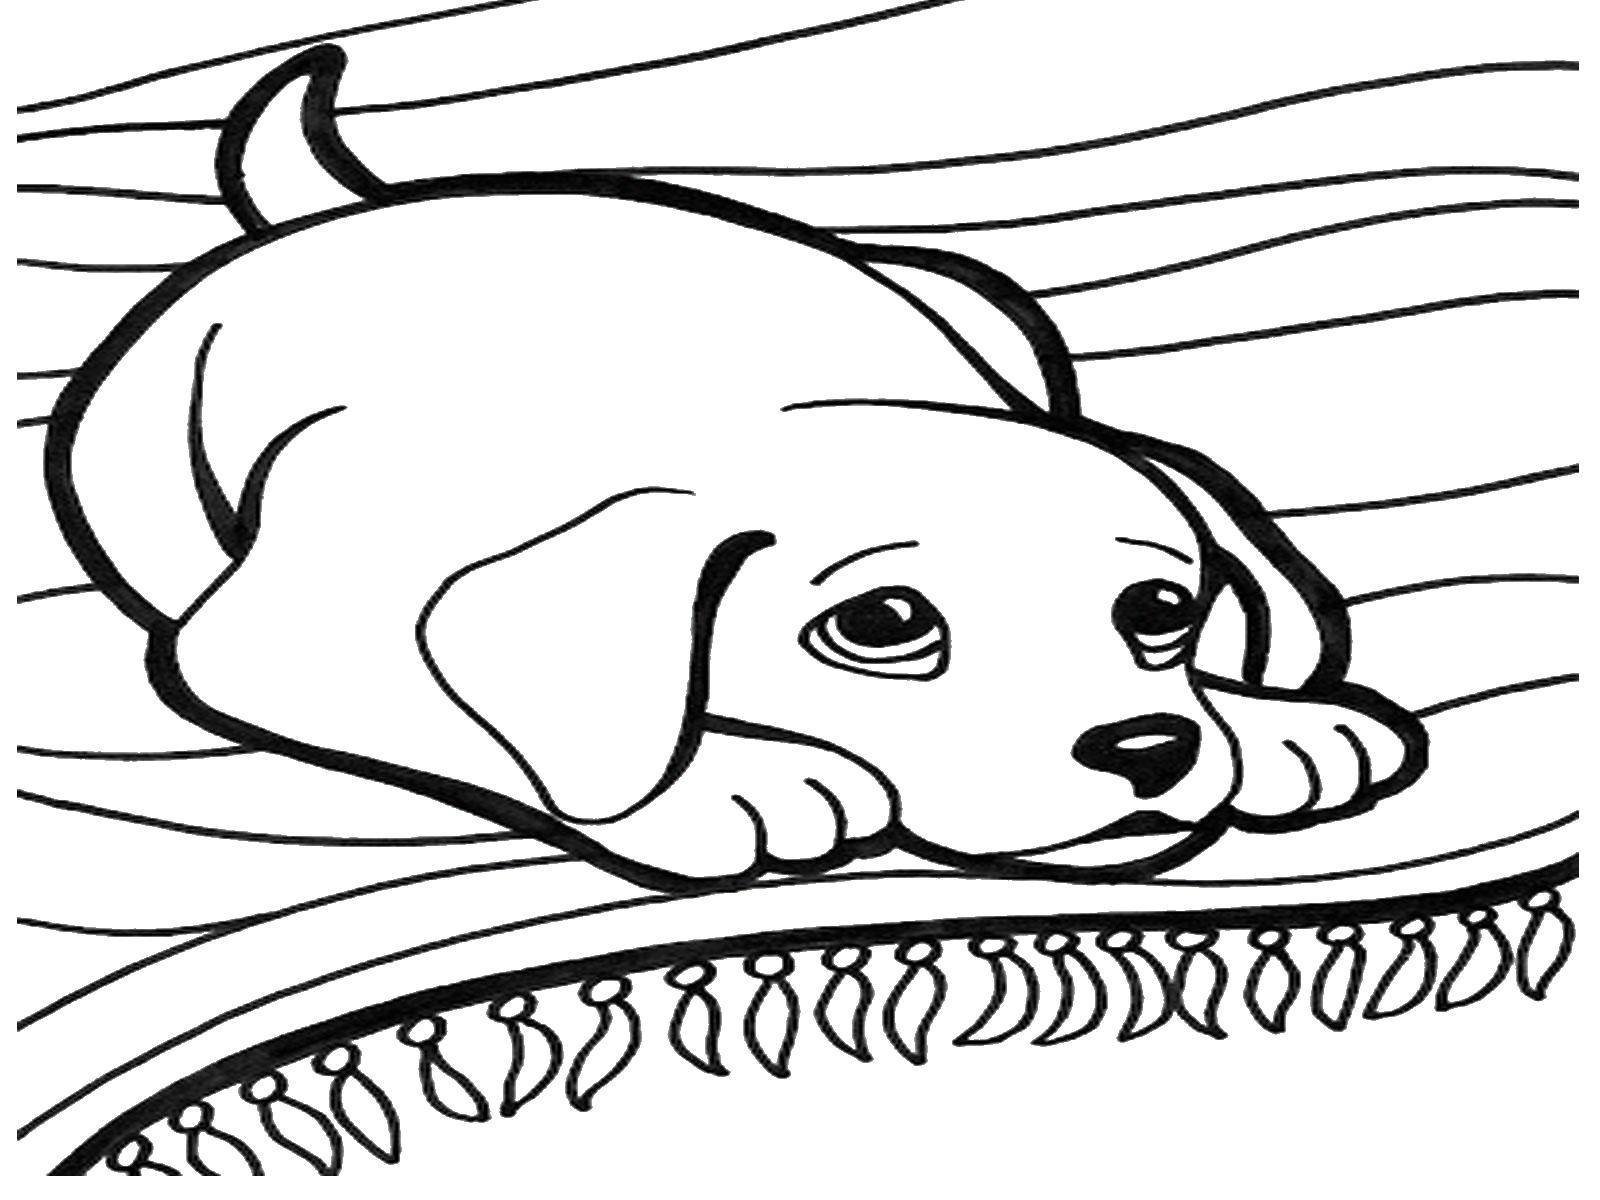 Coloring The dog lies. Category Pets allowed. Tags:  animals, dog, puppy.